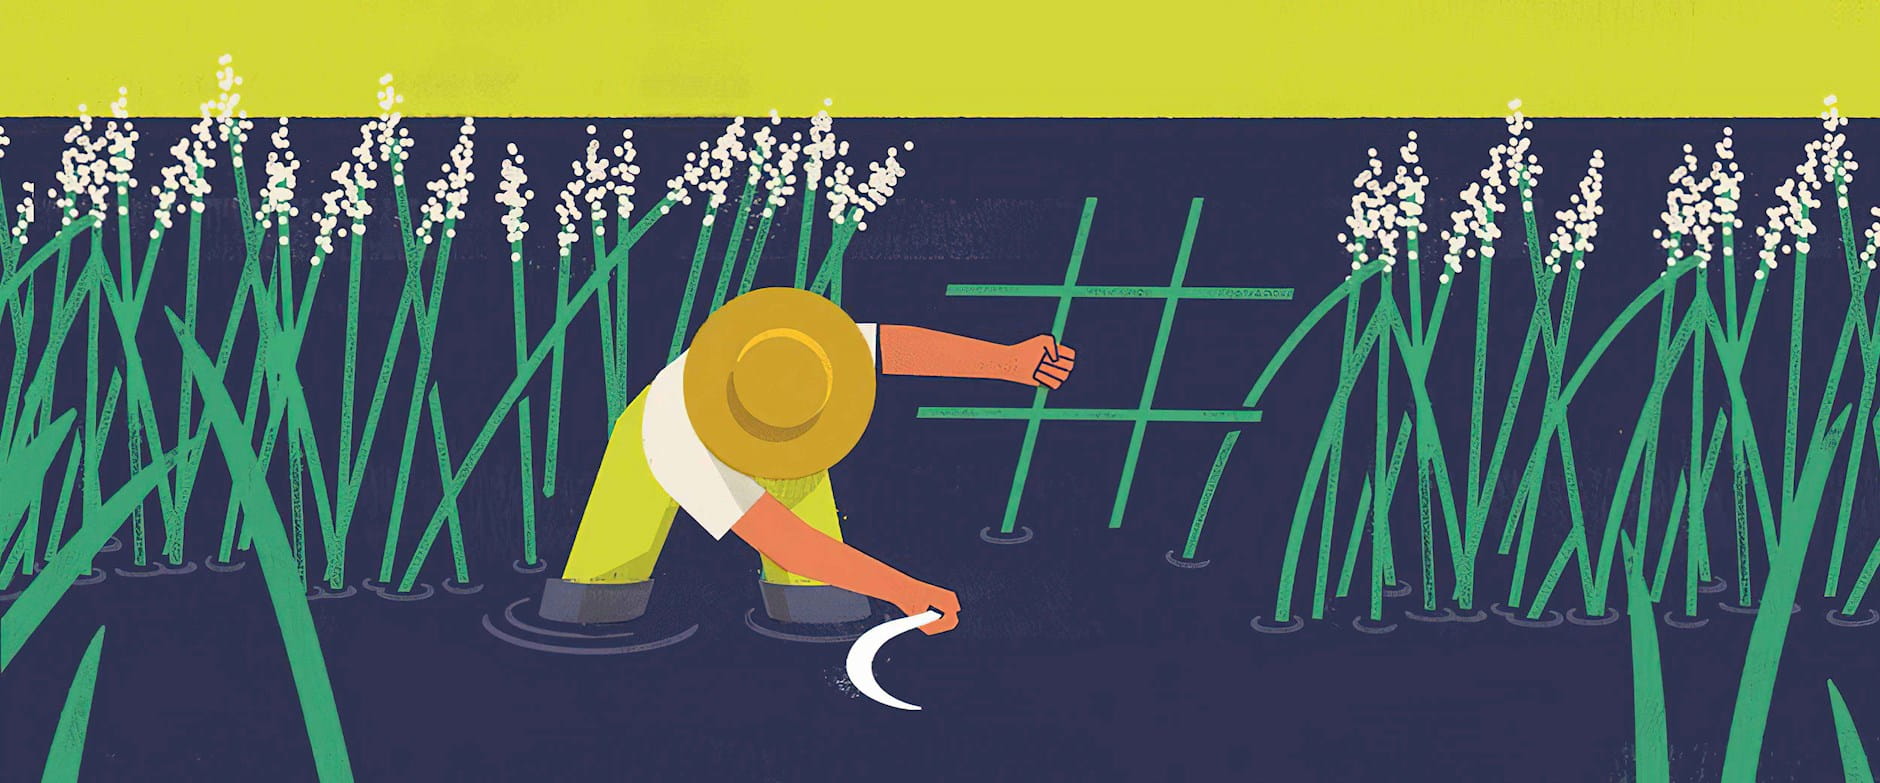 Illustration of man wading in water cutting plants